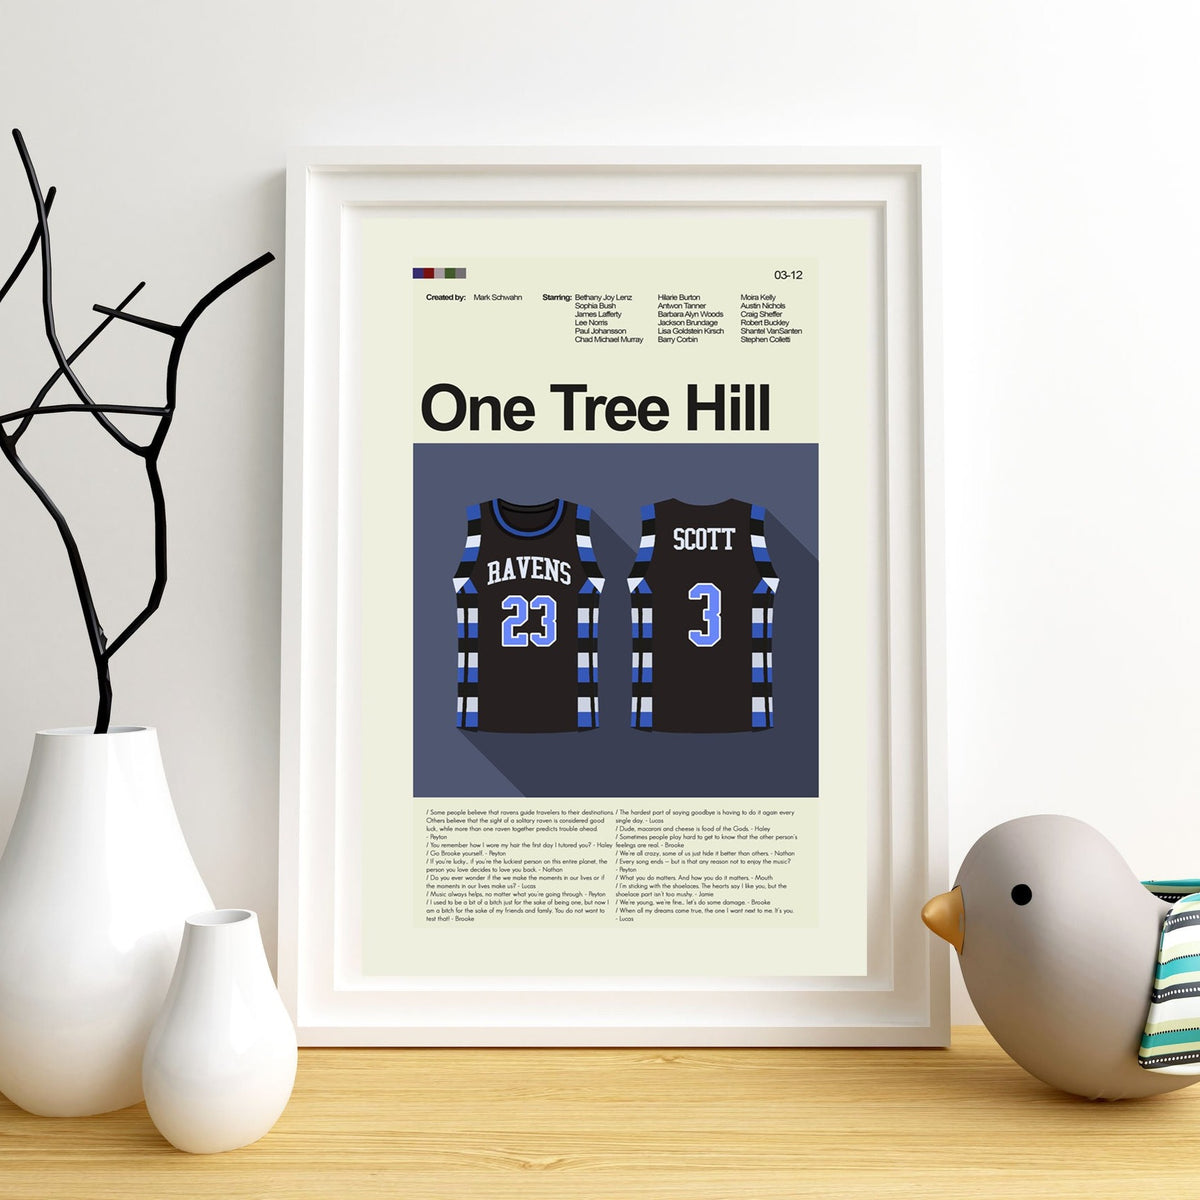 One Tree Hill - Raven's Jersey | 12"x18" or 18"x24" Print only